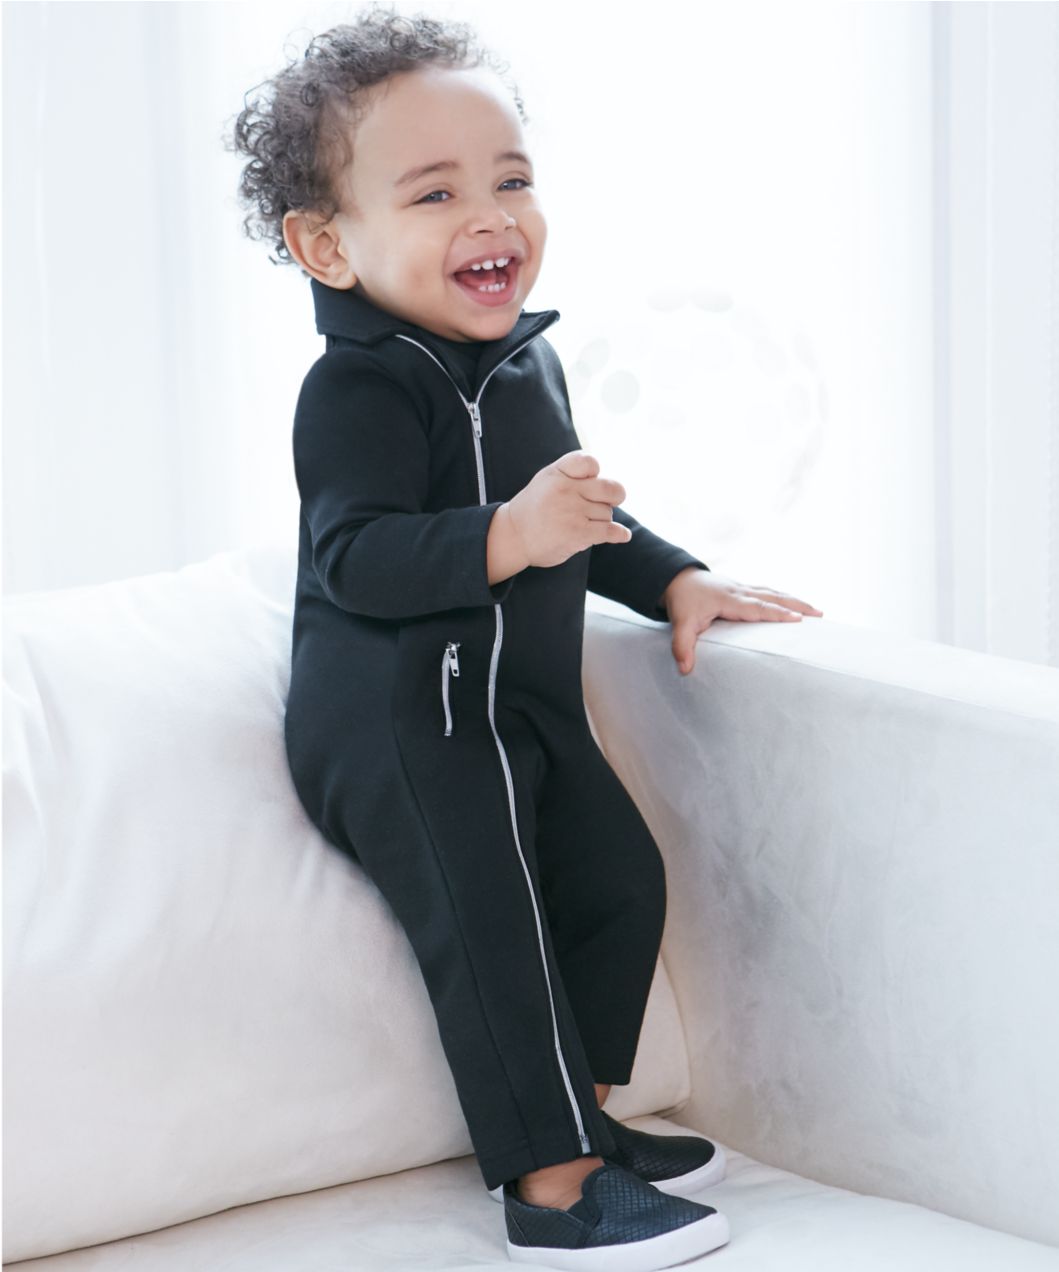 http://mothercare.scene7.com/is/image/MothercareASE/lhc120_2?&$dw_large_mc$&wid=1059&hei=1272&fit=fit,1